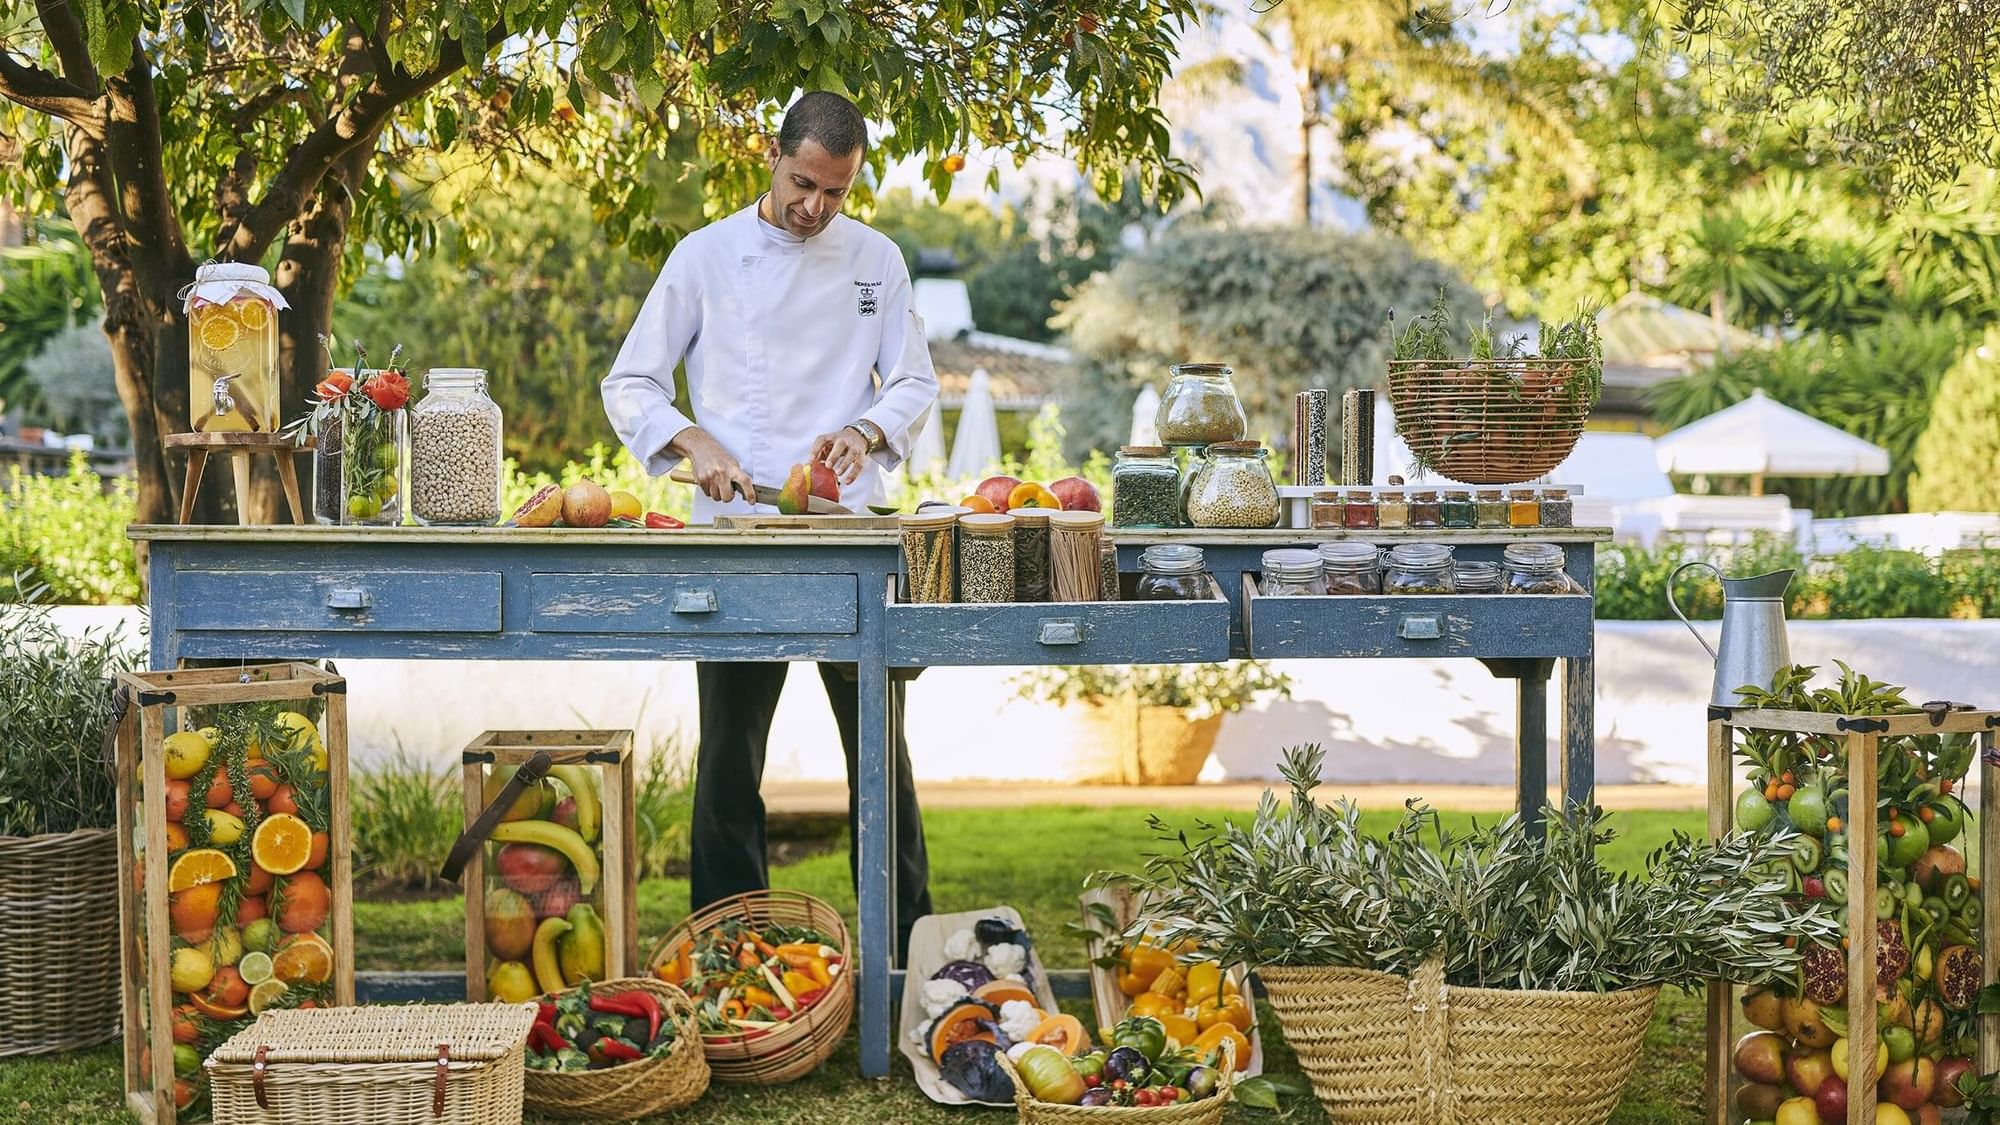 Wellness chef cooking in the Wellness restaurant El Olivar at the Garden Pool